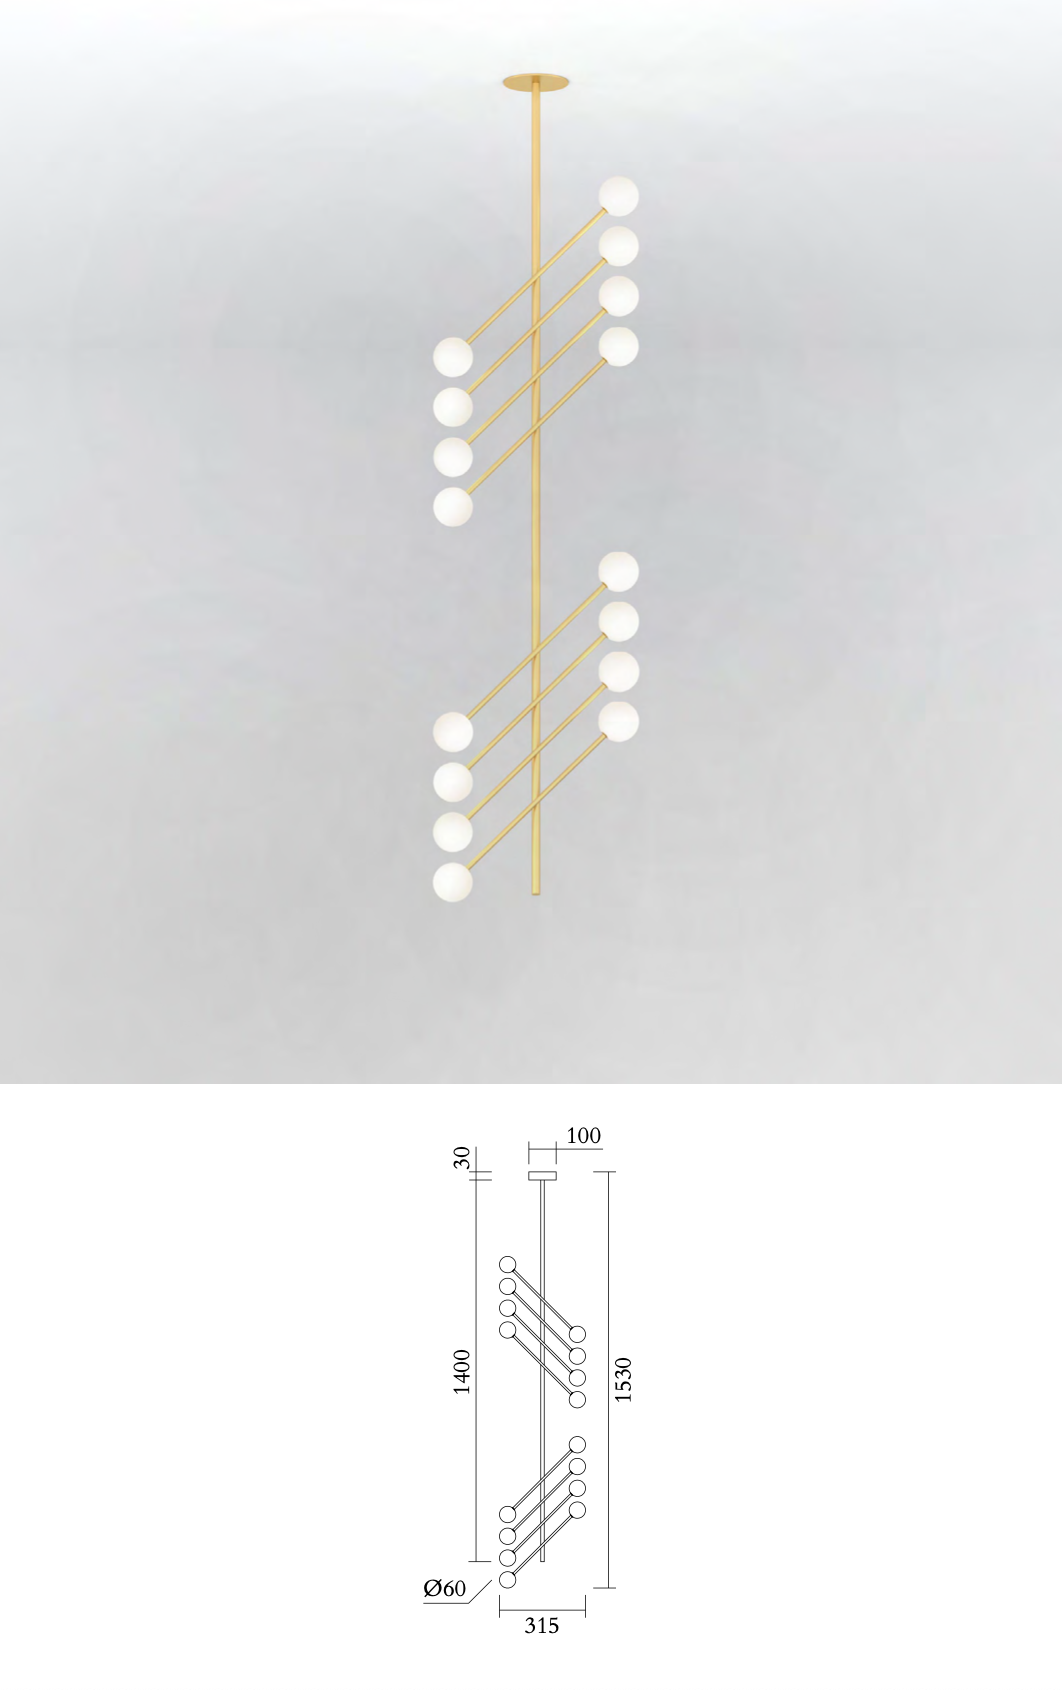 Offset 469 Pendant Light 4+4 Tubes · €5775 · ATELIER ARETI | CURATED BY EYEDS